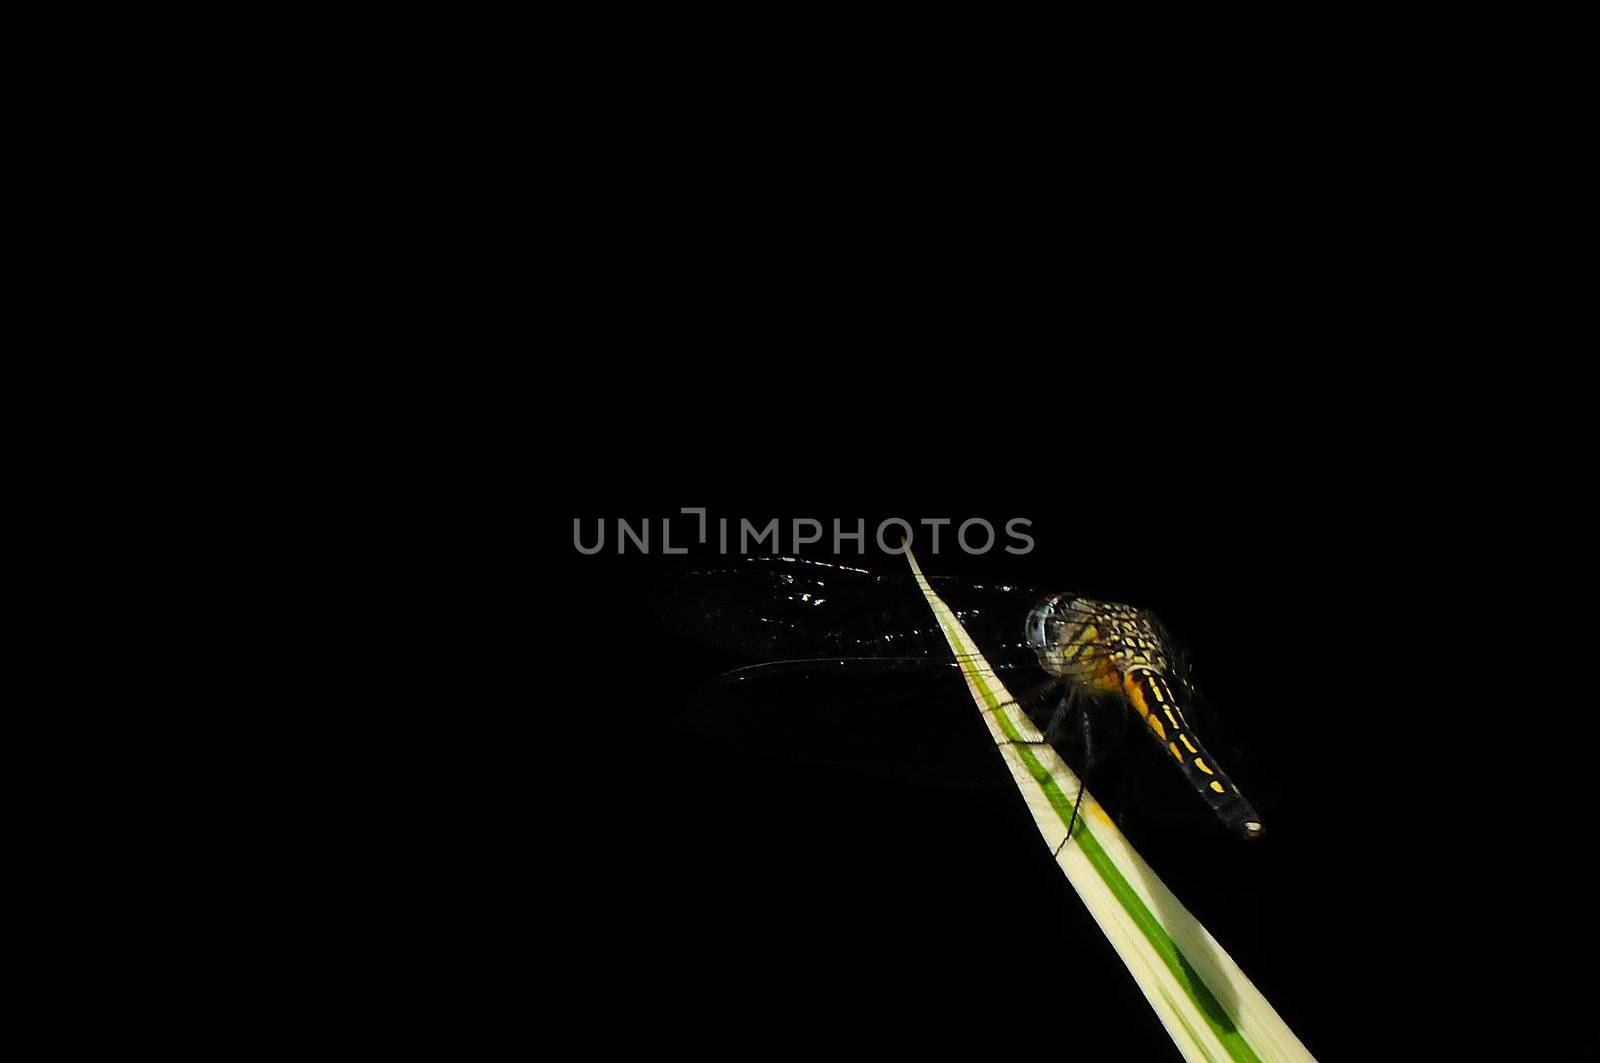 Dragonfly with black background. Photographed as is. Suitable for wallpaper.